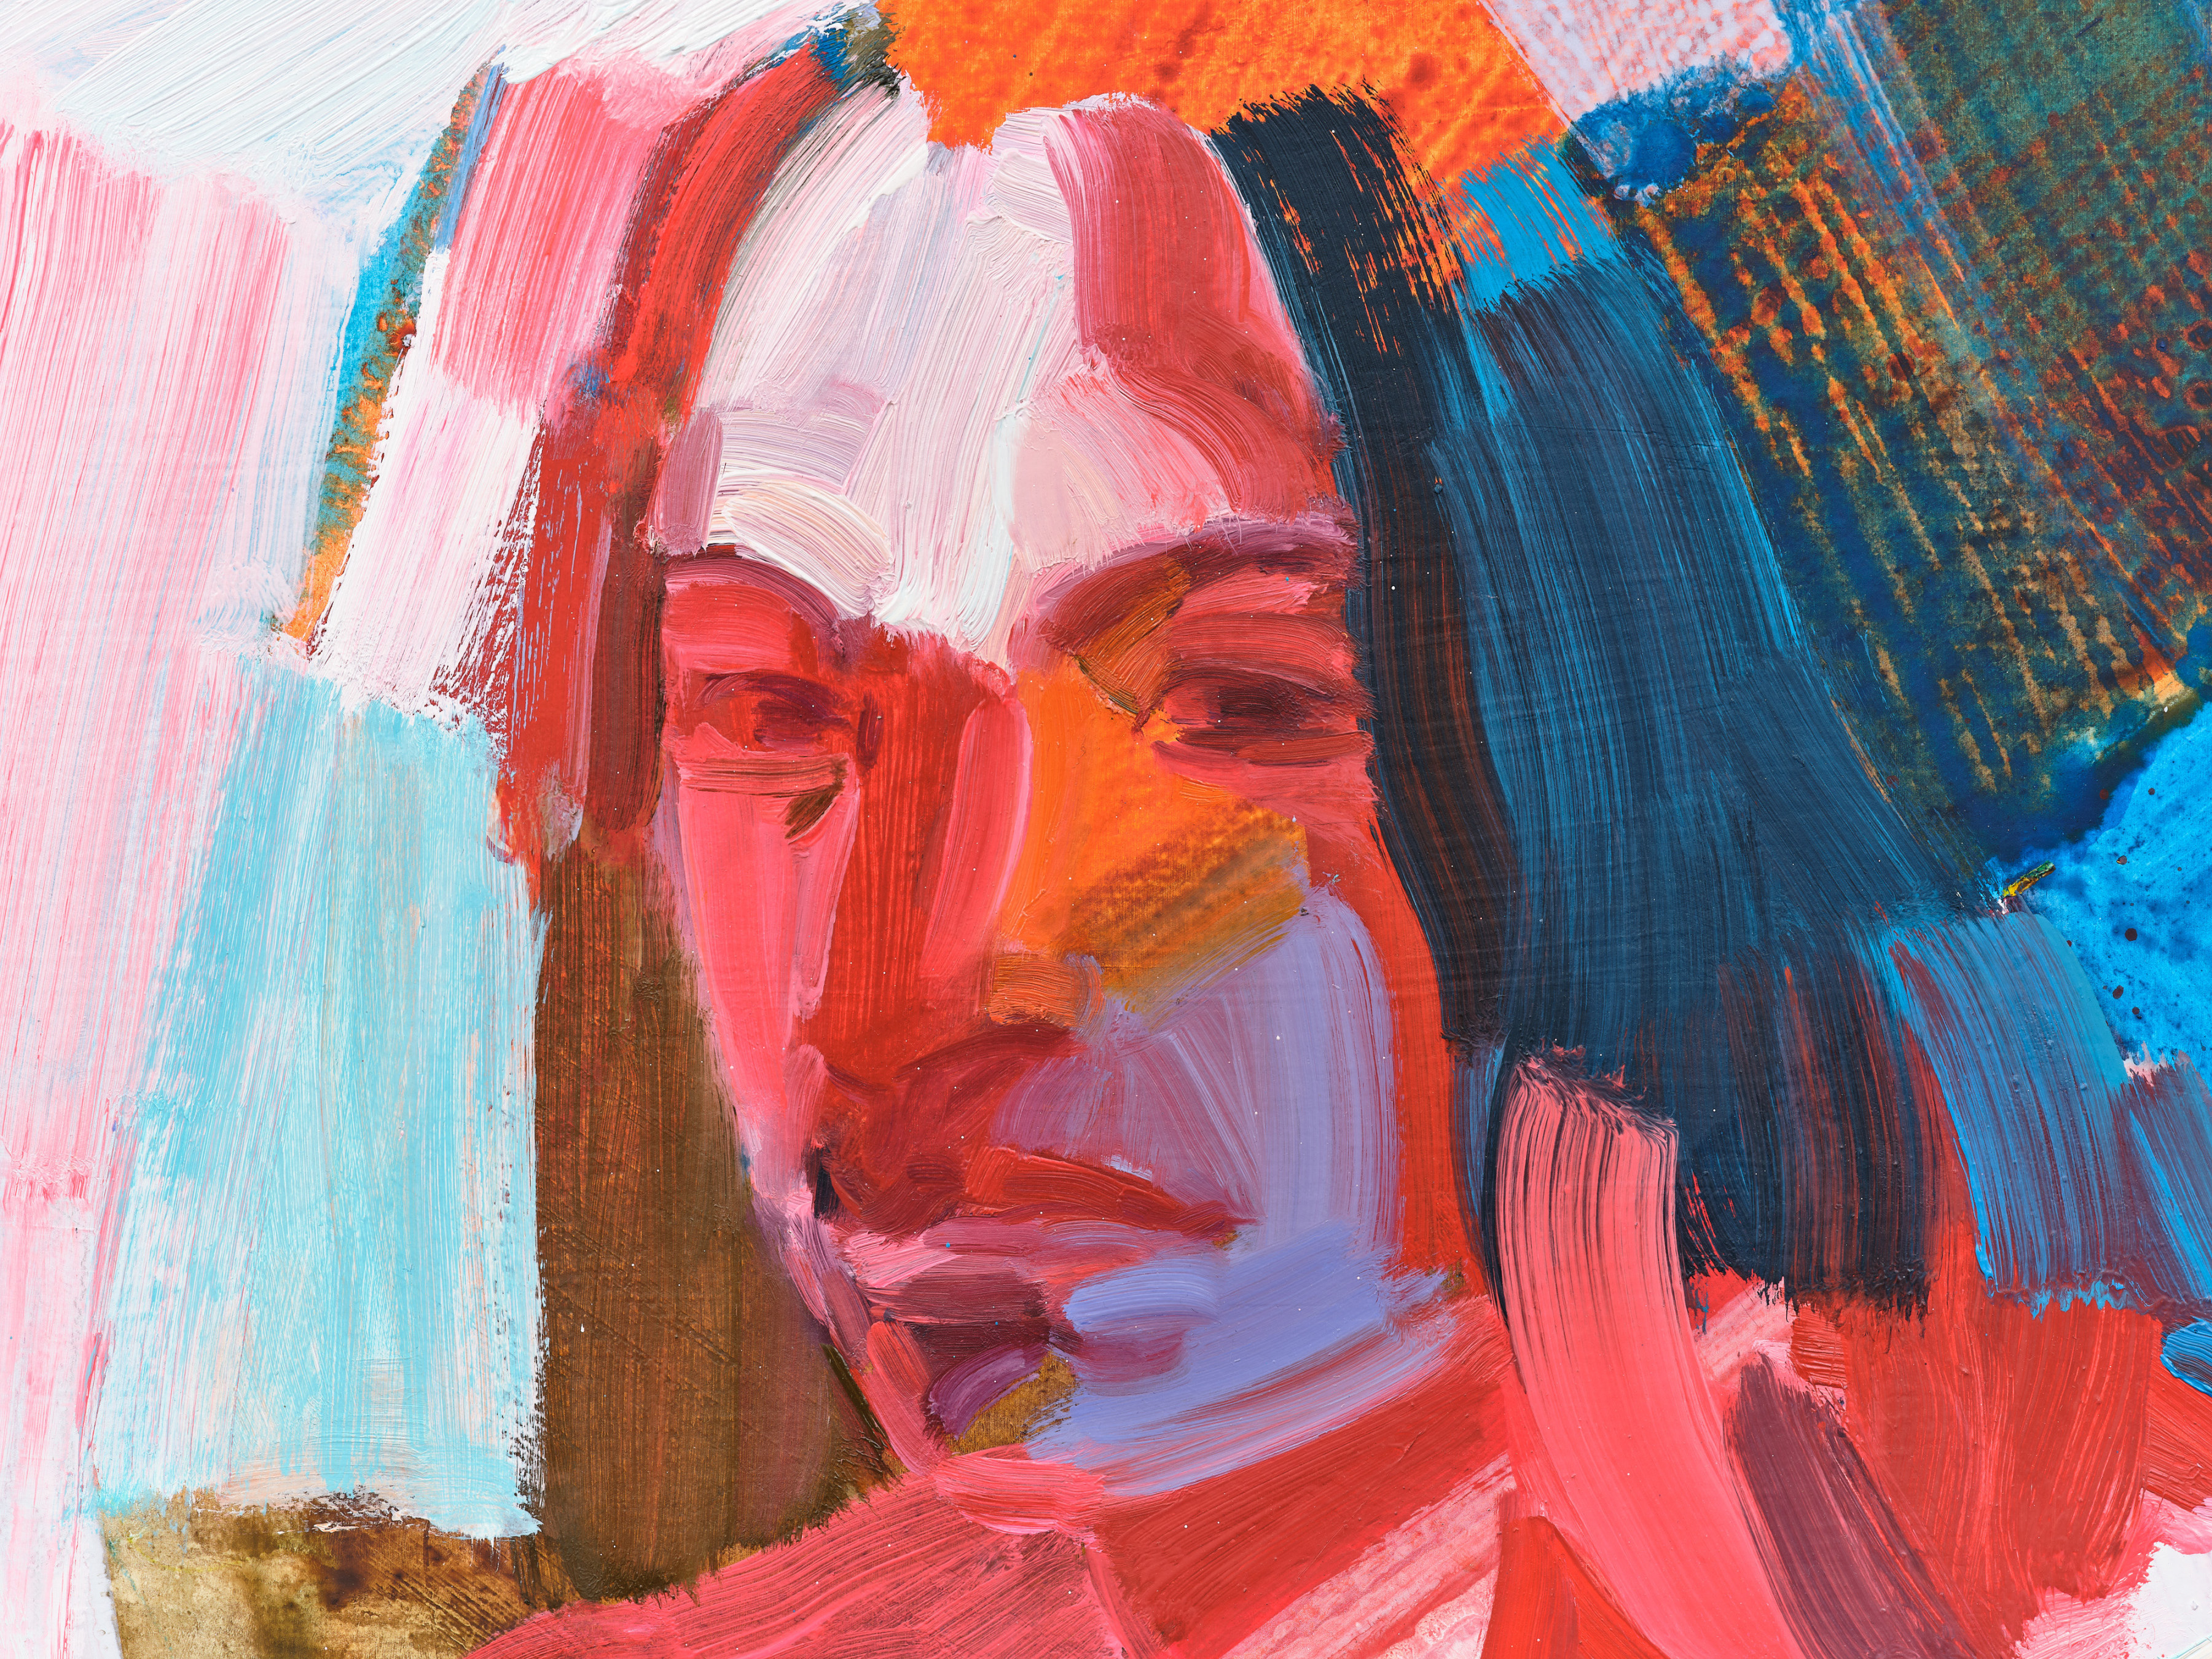 Detail of a woman's face rendered in reds, orange, lapis, and ochre in Sarah Awad's "The In-Betweens"